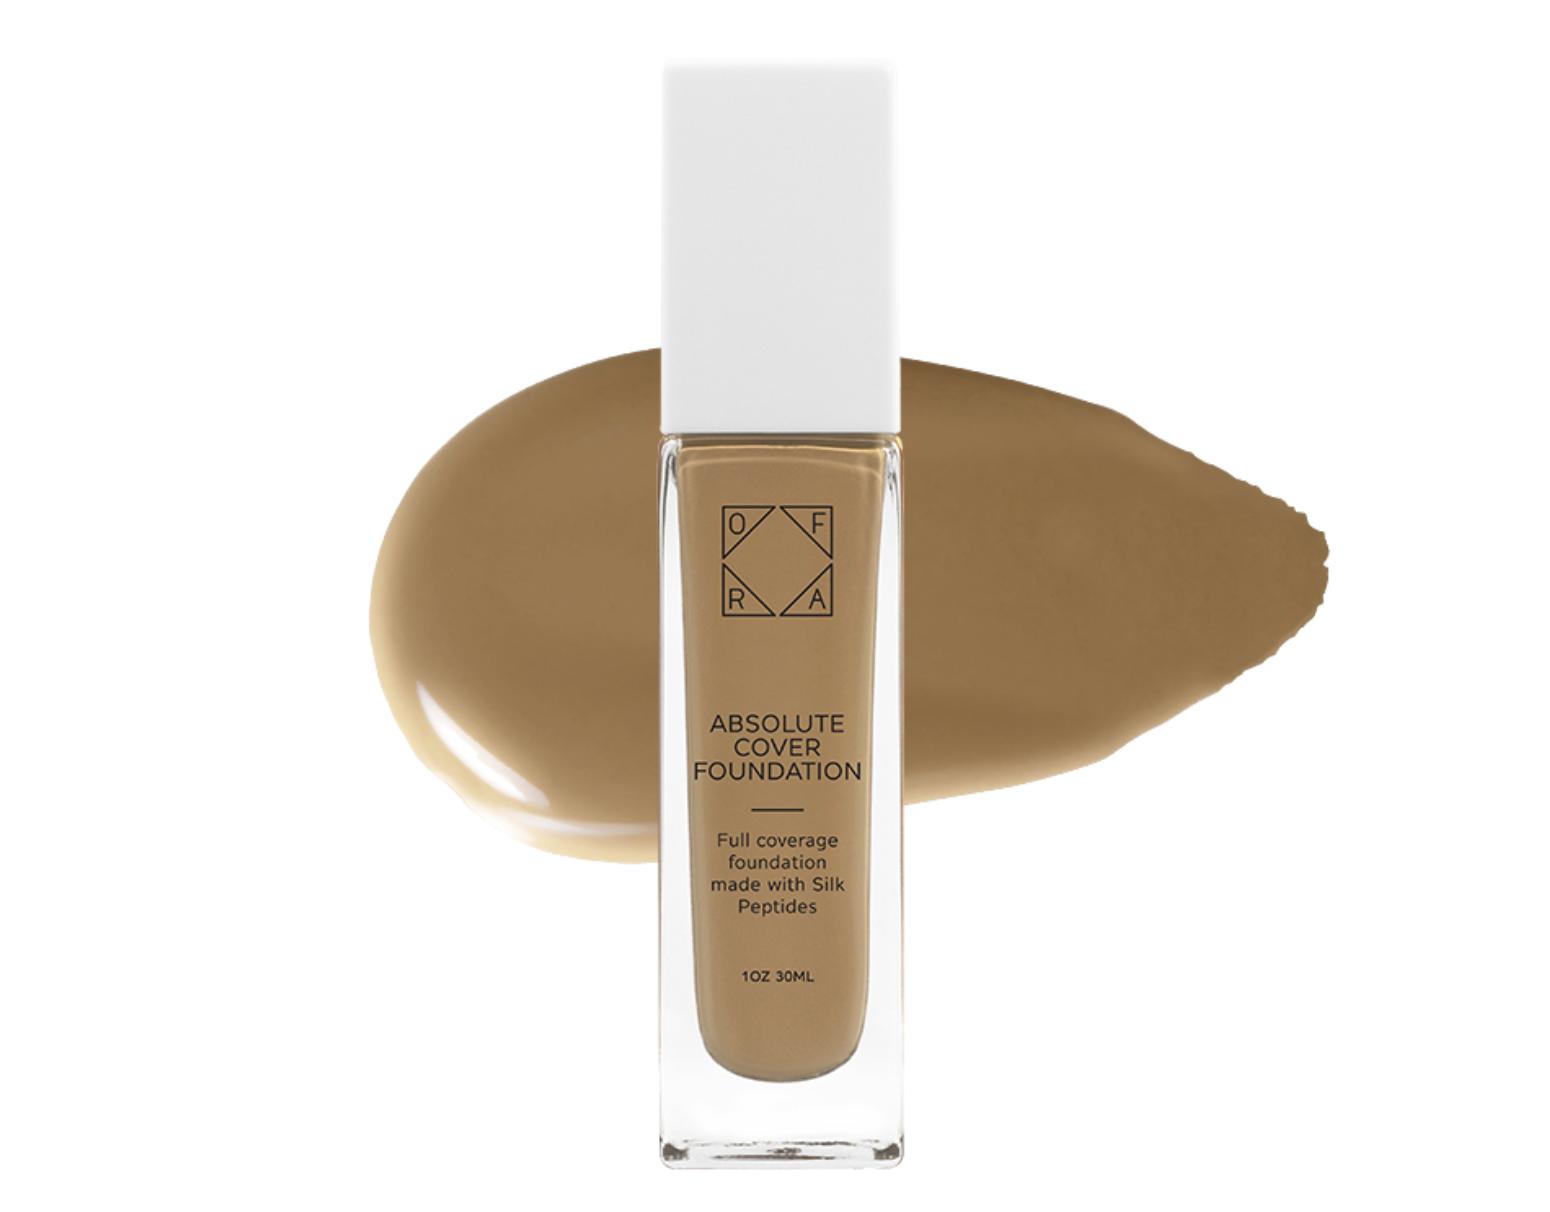 Ofra Cosmetics Absolute Cover Foundation #7.25